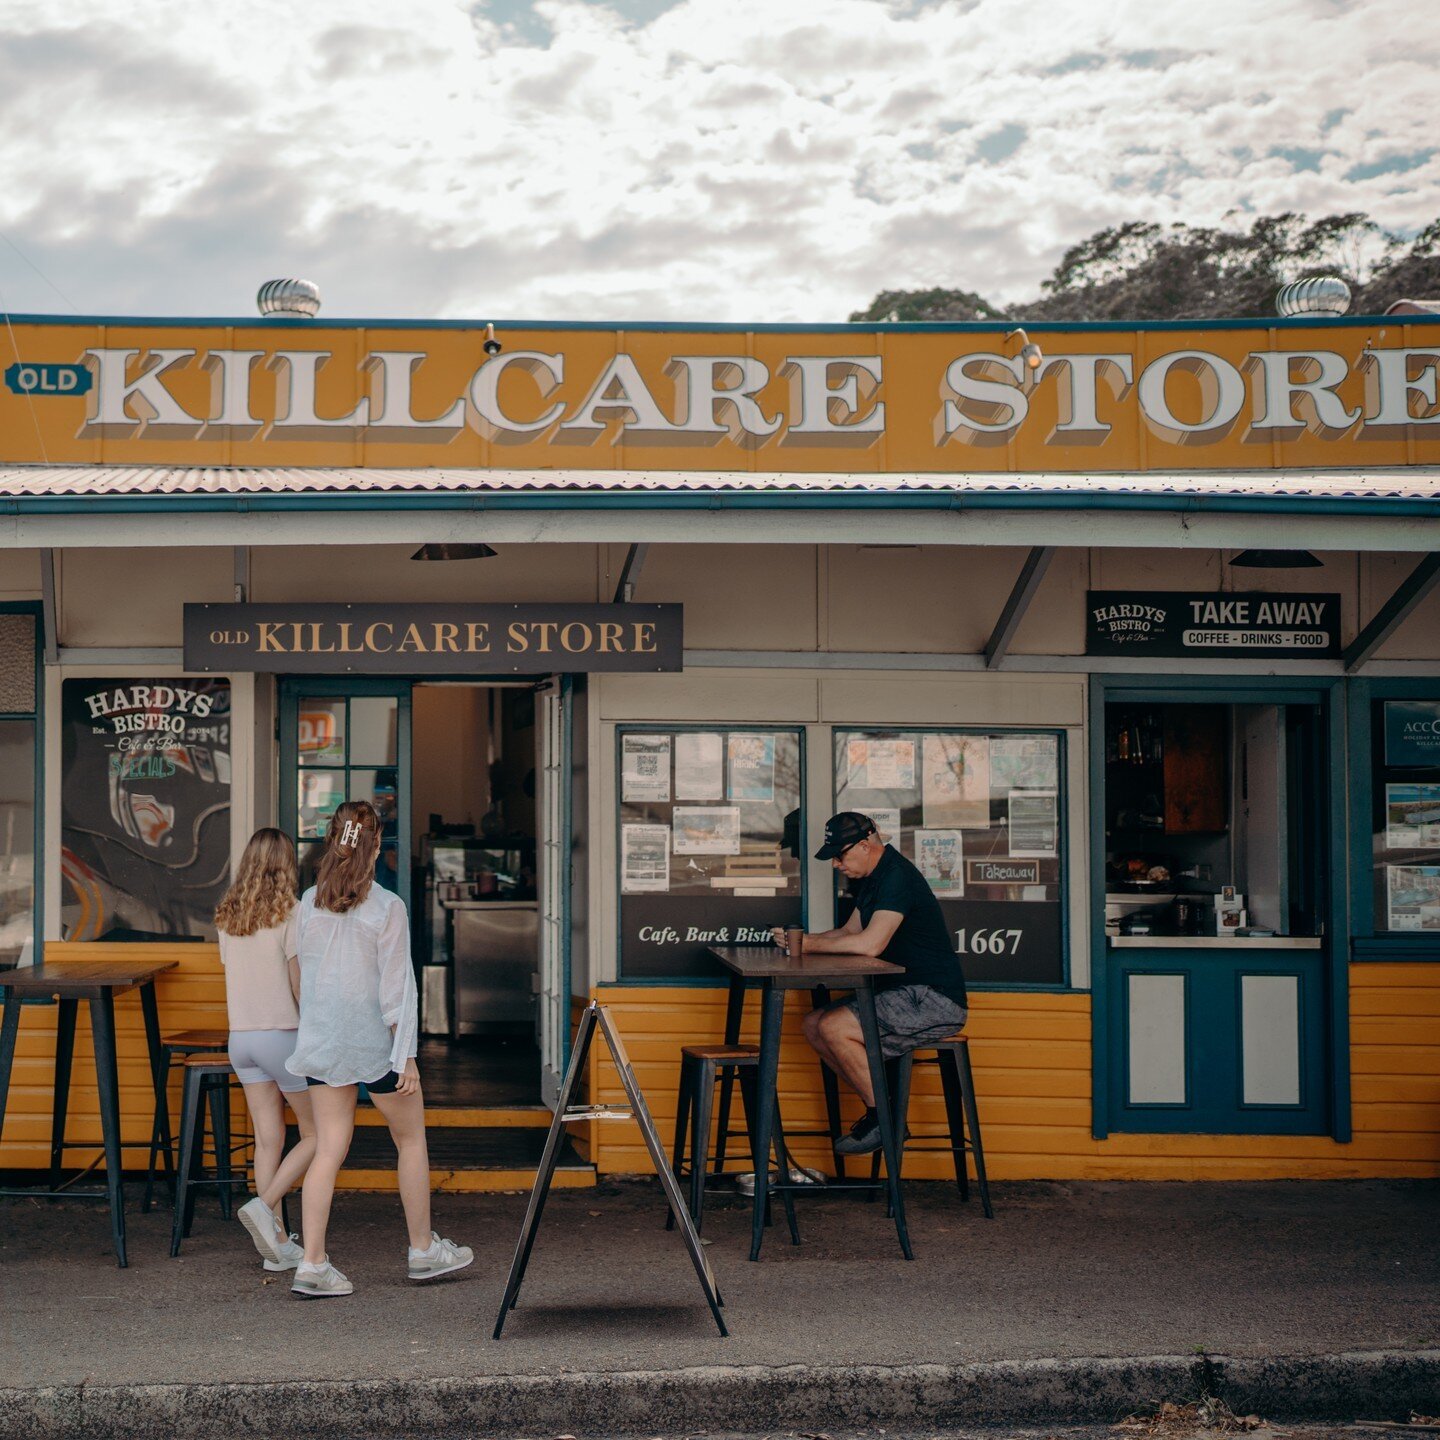 The @oldkillcarestore is right around the corner from @ahara.house.

We love this character filled heritage building overlooking the bay and the wharf. A perfect spot for some breakfast or lunch, or simply to enjoy a coffee, wine or beer.

📷 @danwil